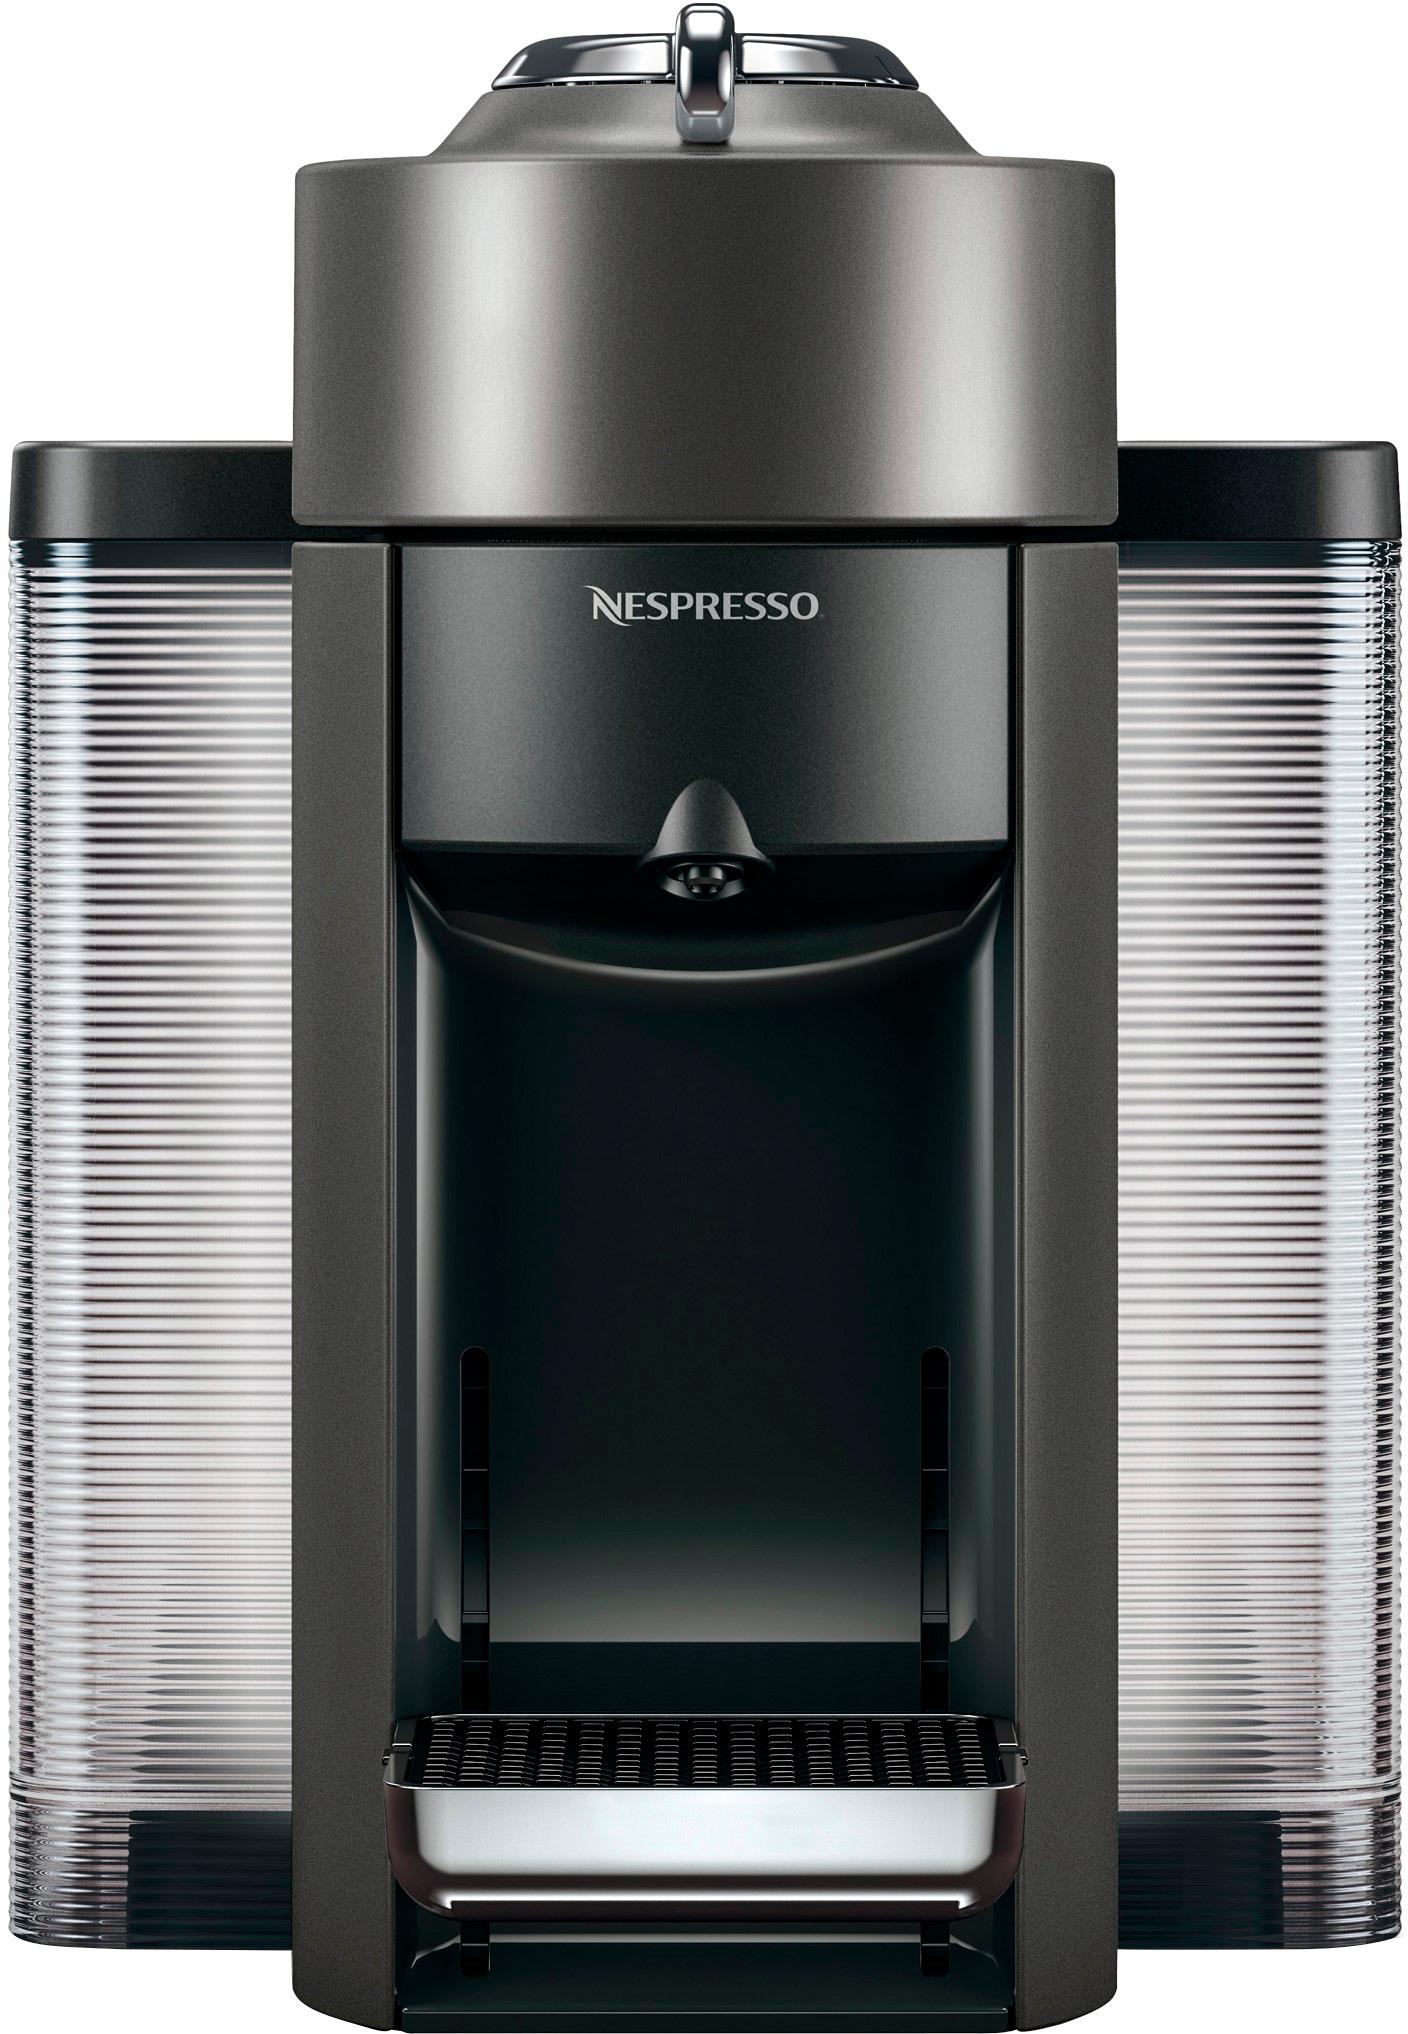 Nespresso Vertuo Coffee Maker And Espresso Machine With Aeroccino Milk Frother By Delonghi Graphite Metal Env135gyae Best Buy,Cheap Flooring Ideas For Bedroom